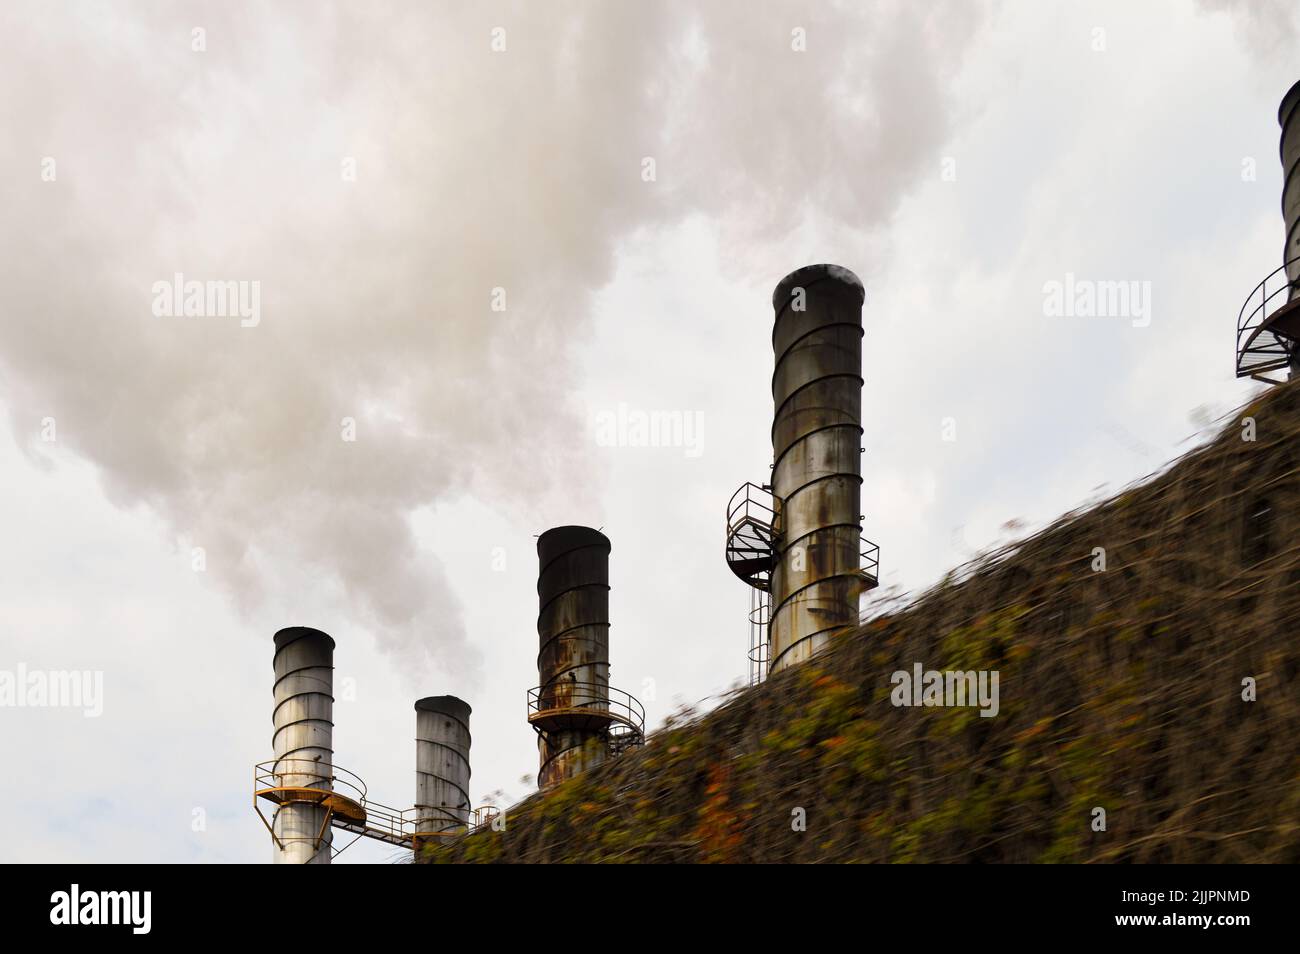 industrial smokestacks belching out smoke polluting behind a fence Stock Photo